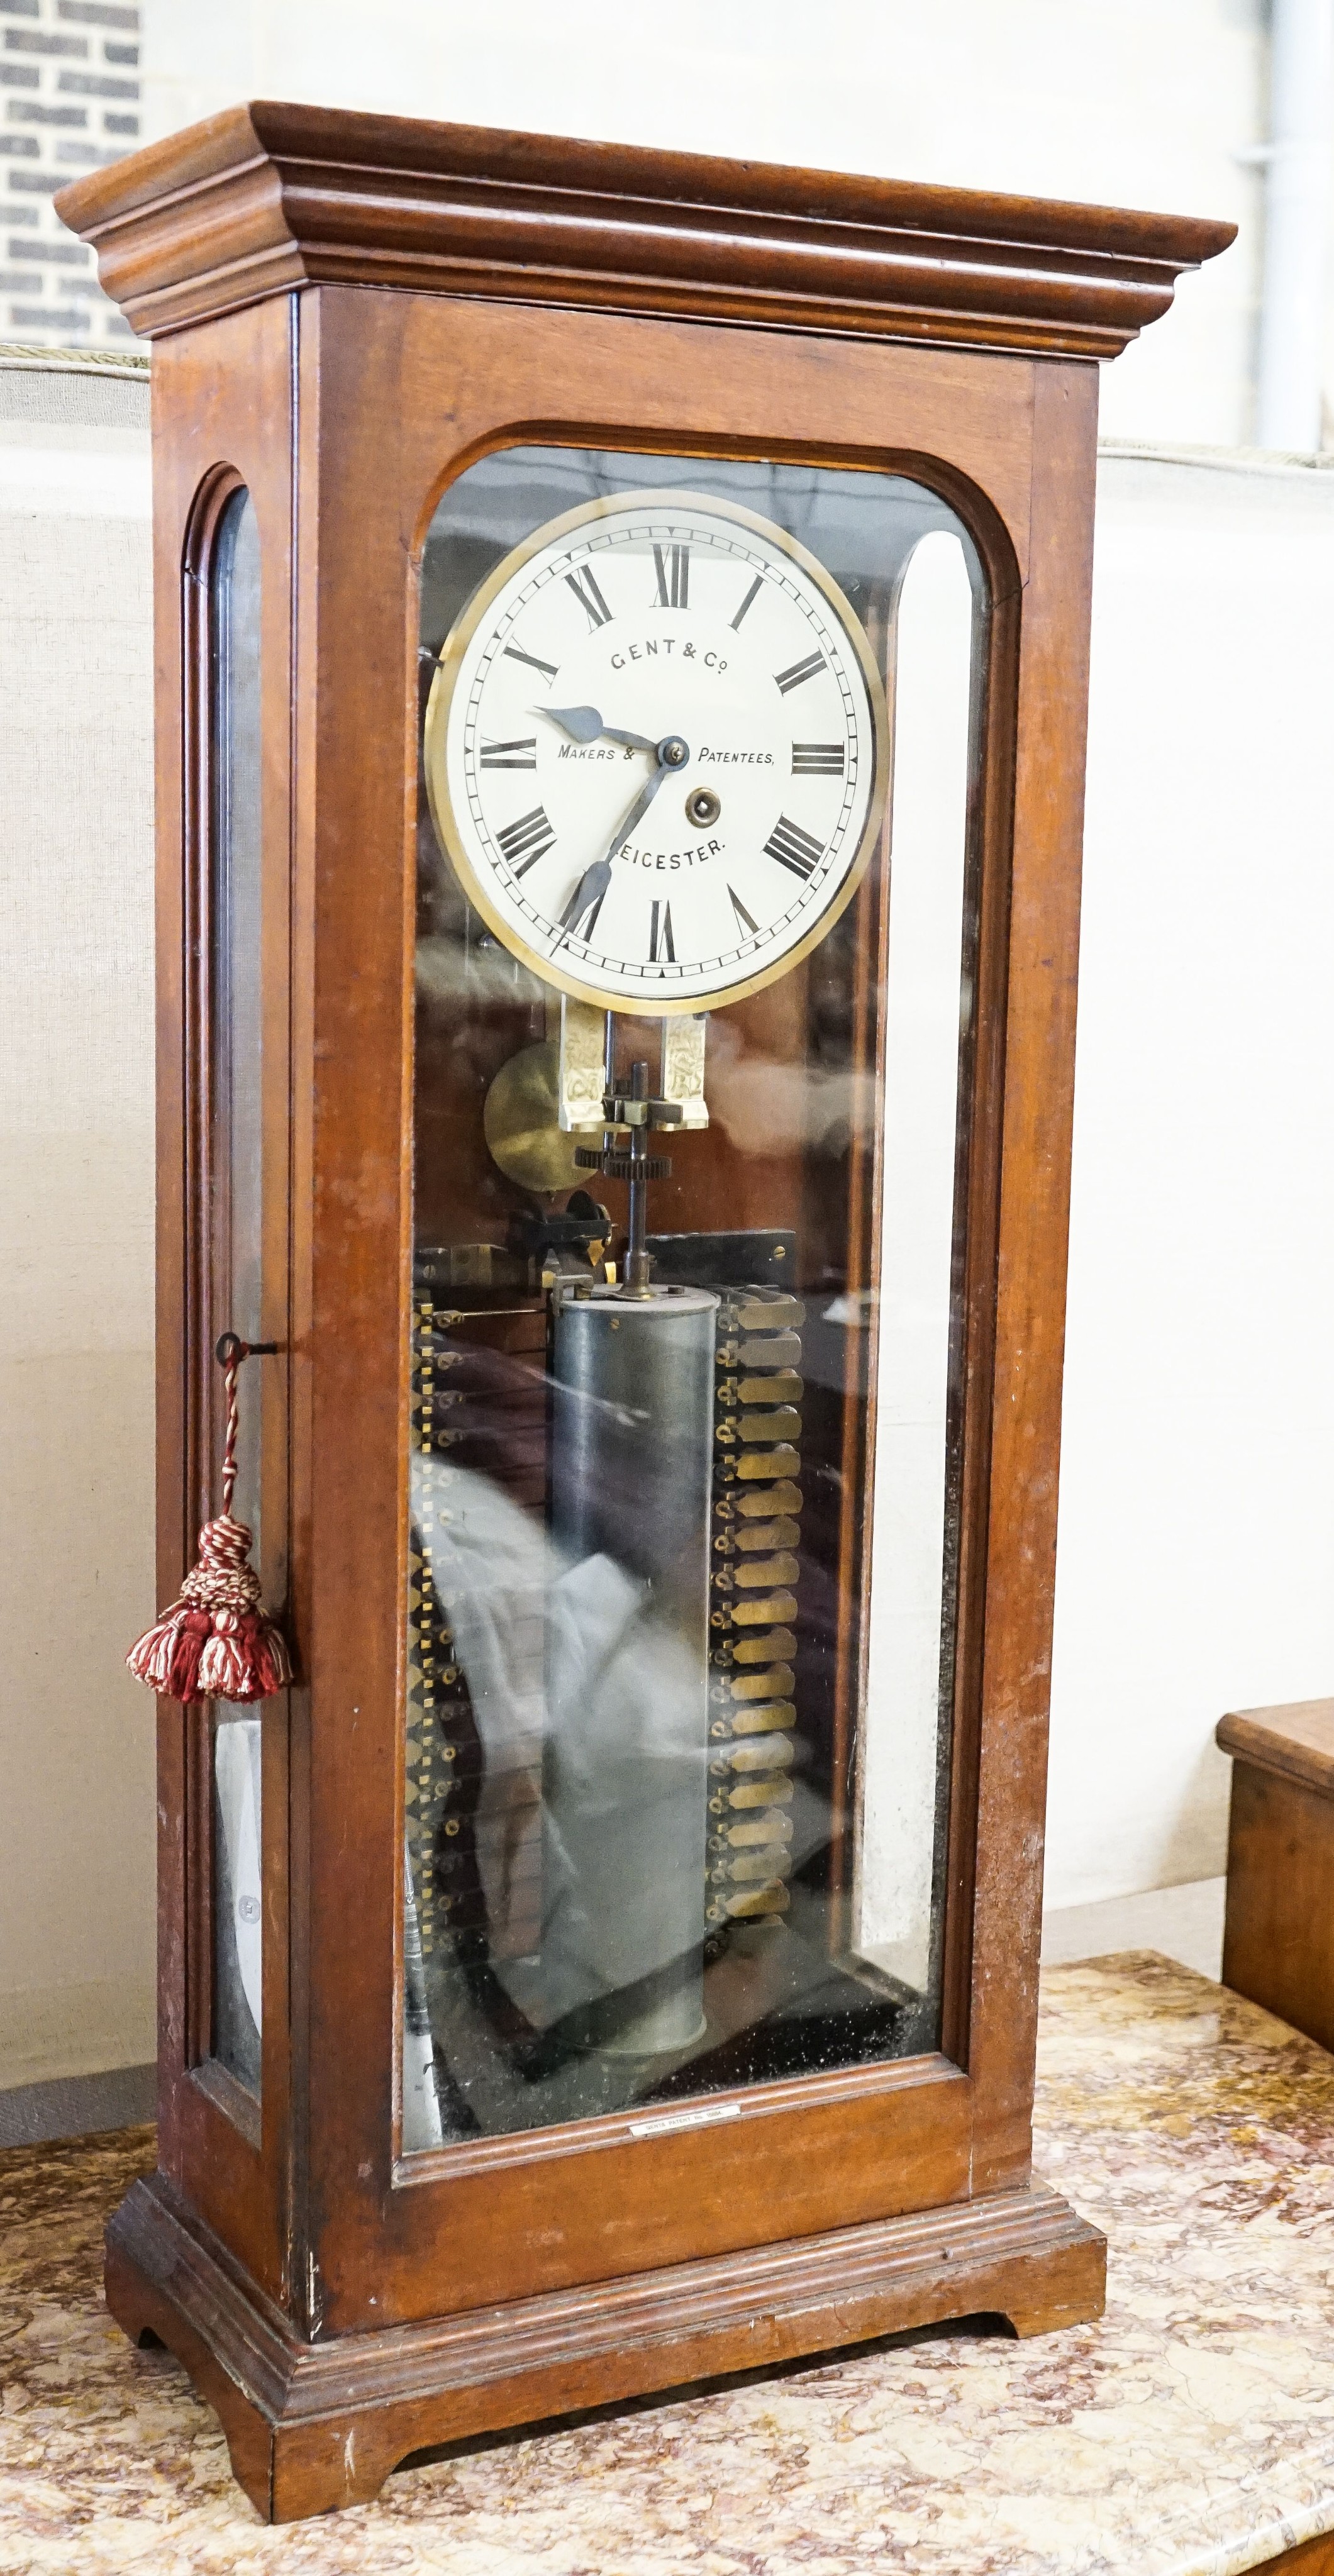 A Gent & Co. Ltd. Patent electric watchman's or 'telltale' clock, single cylinder mahogany cased, height 101cm